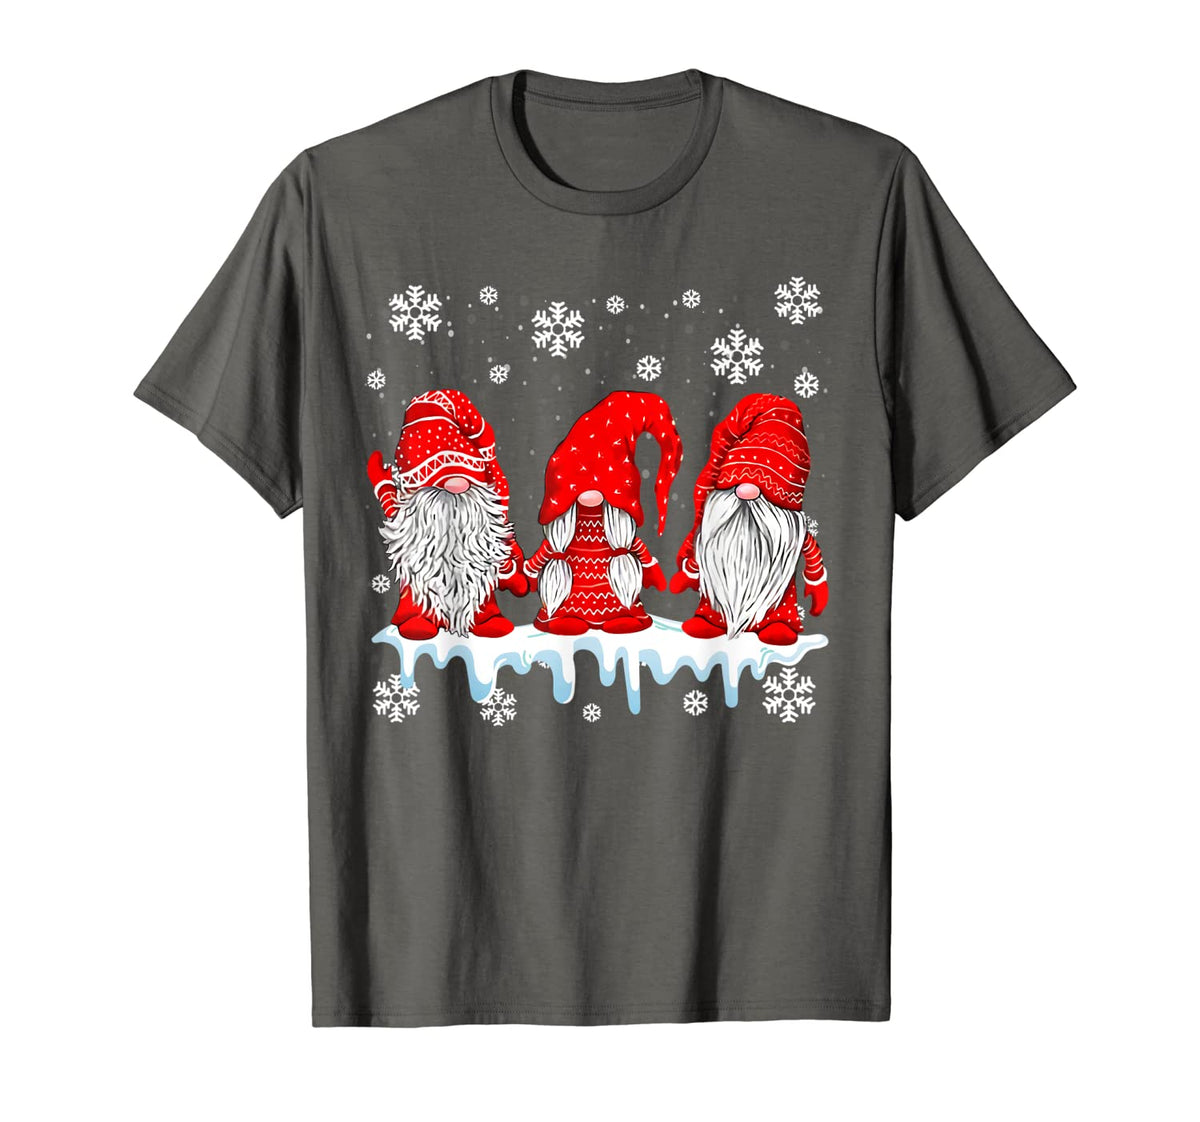 Three Gnomes In Red Costume Christmas Gift Funny X-Mas Tee T-Shirt New ...